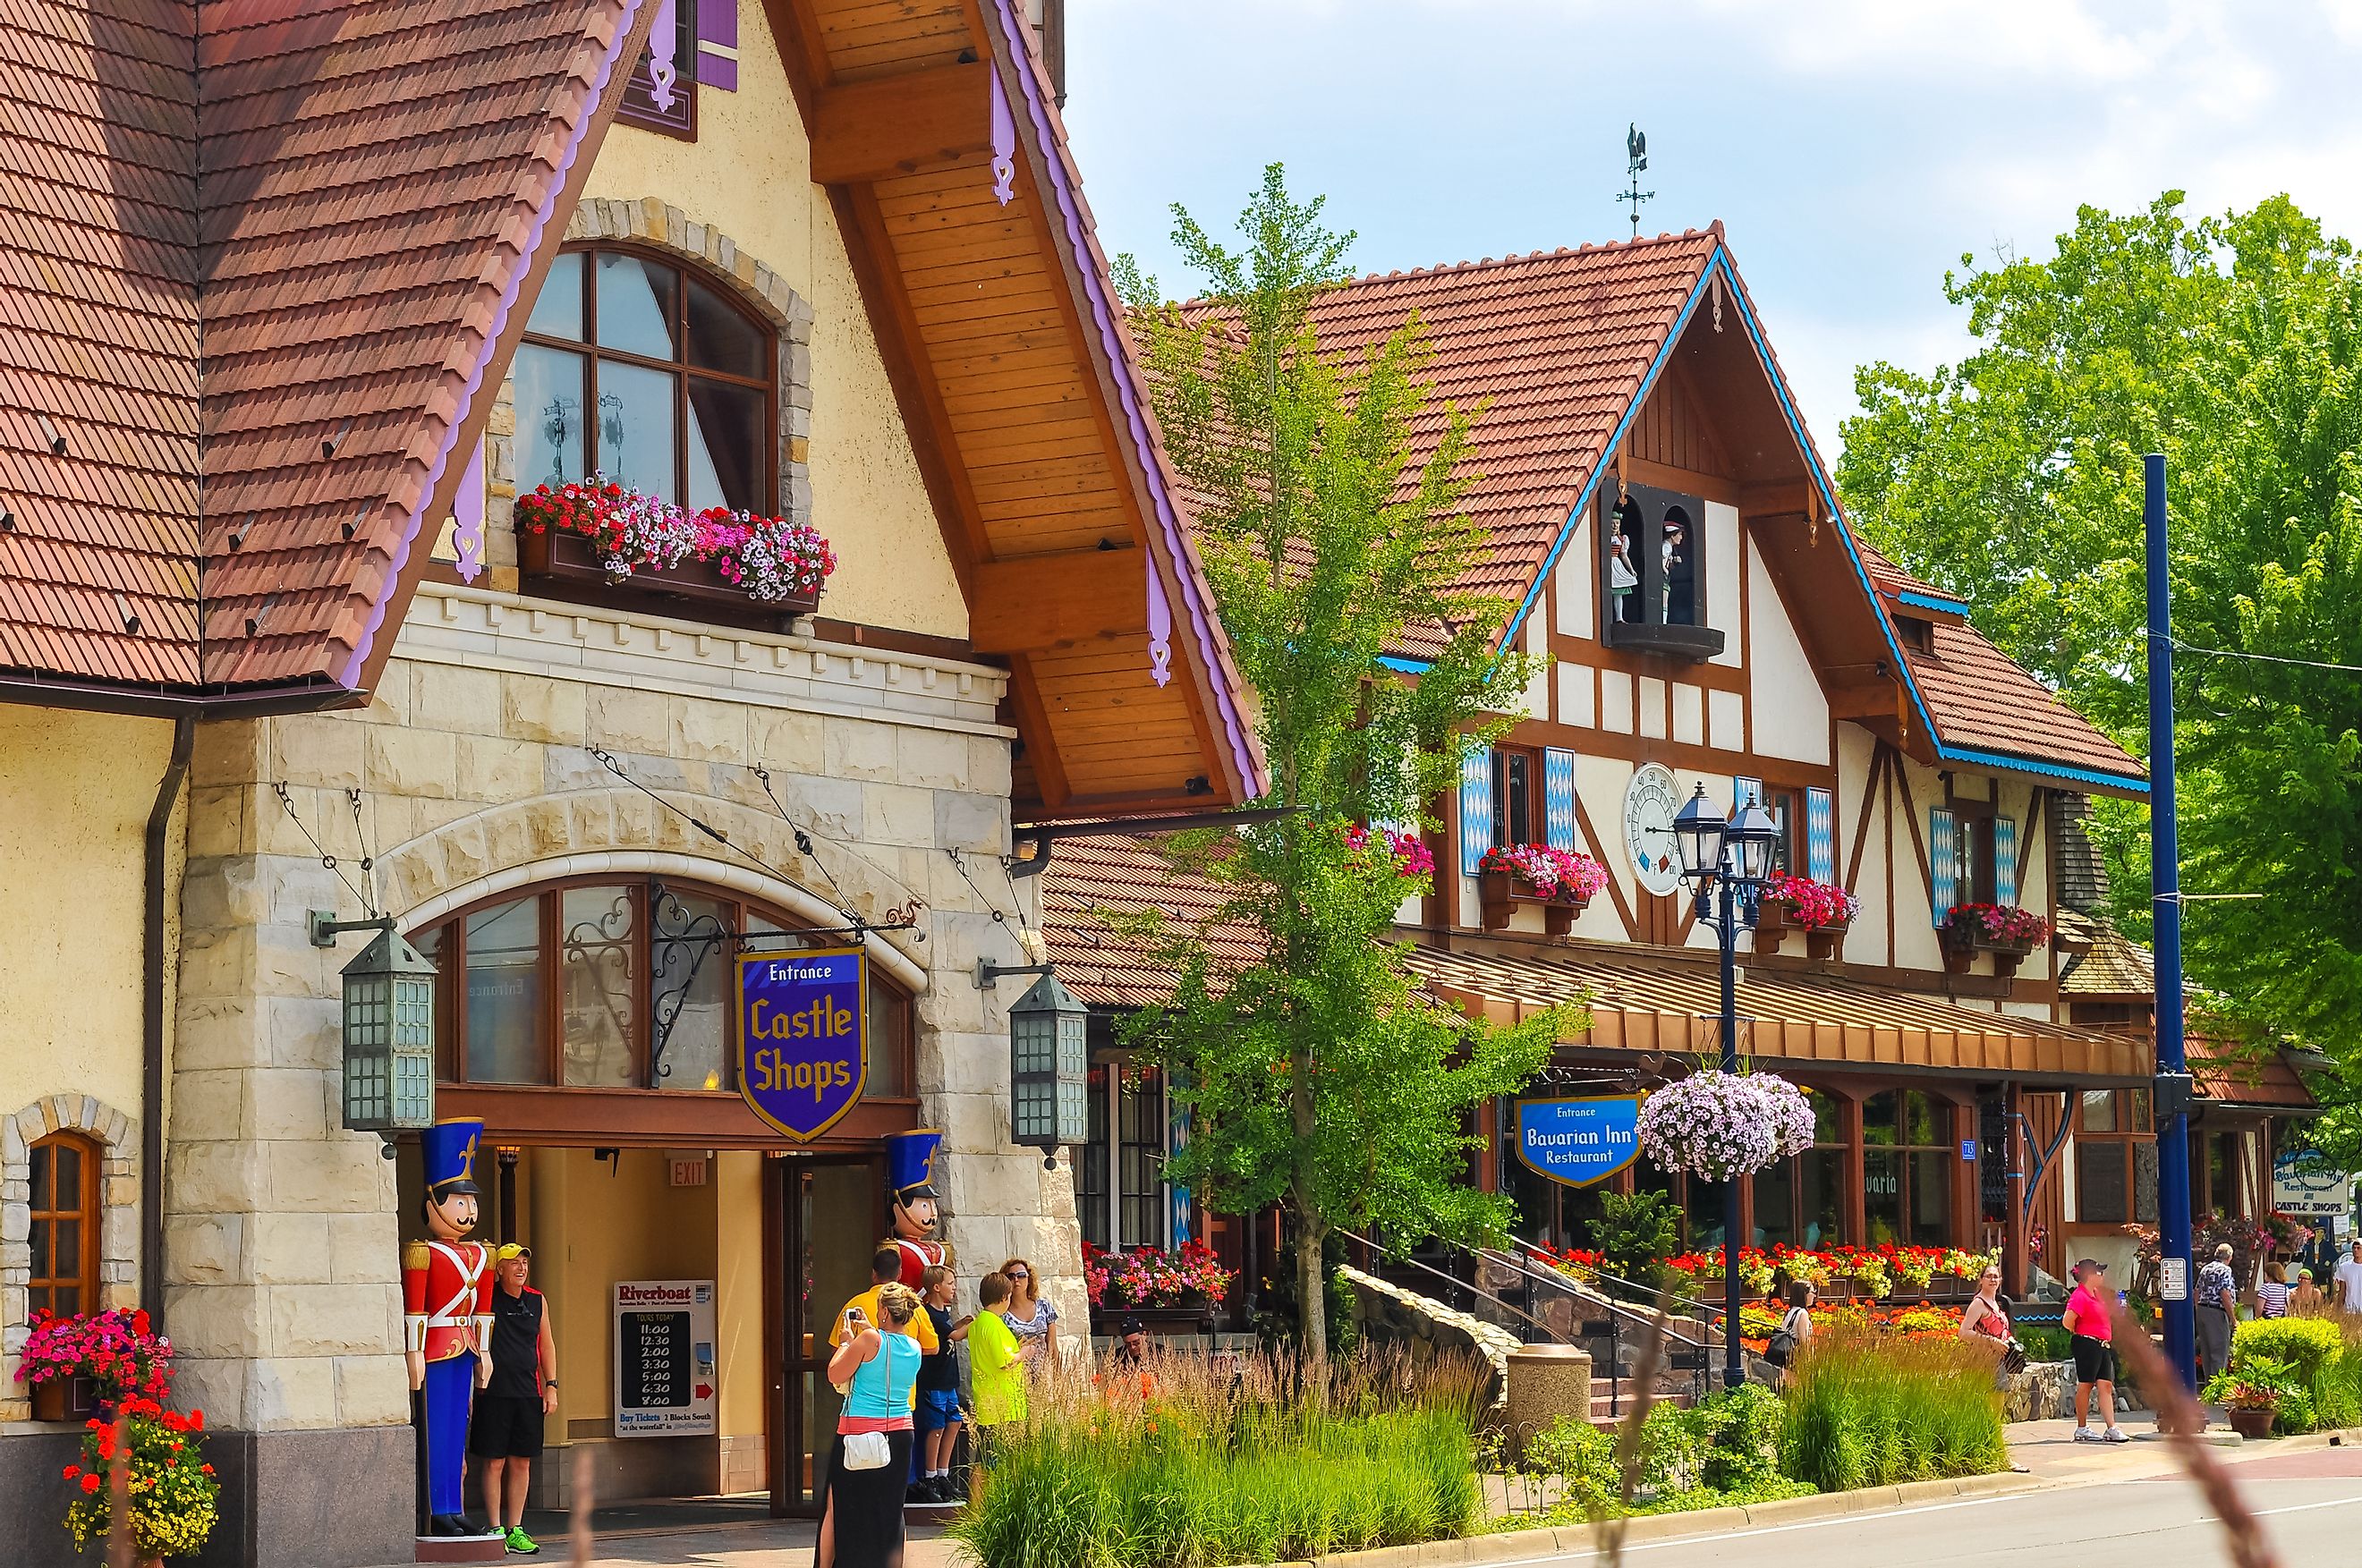 he Bavarian Inn, one of the main restaurants and attractions in this Michigan town, has brought throngs of visitors to sample German culture for decades.